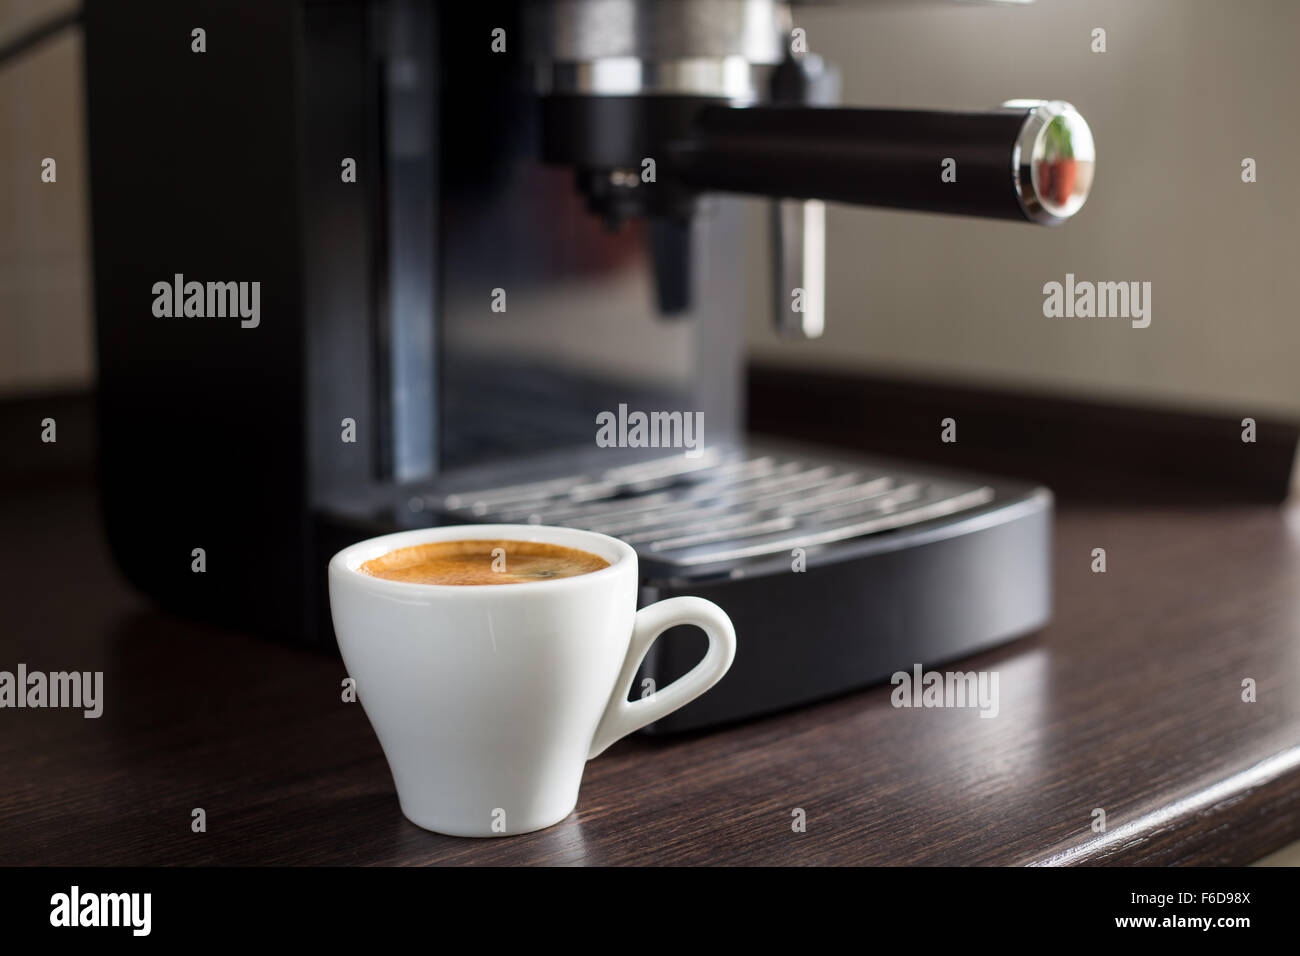 https://c8.alamy.com/comp/F6D98X/white-ceramic-cup-of-espresso-with-coffee-machine-on-the-table-brewing-F6D98X.jpg